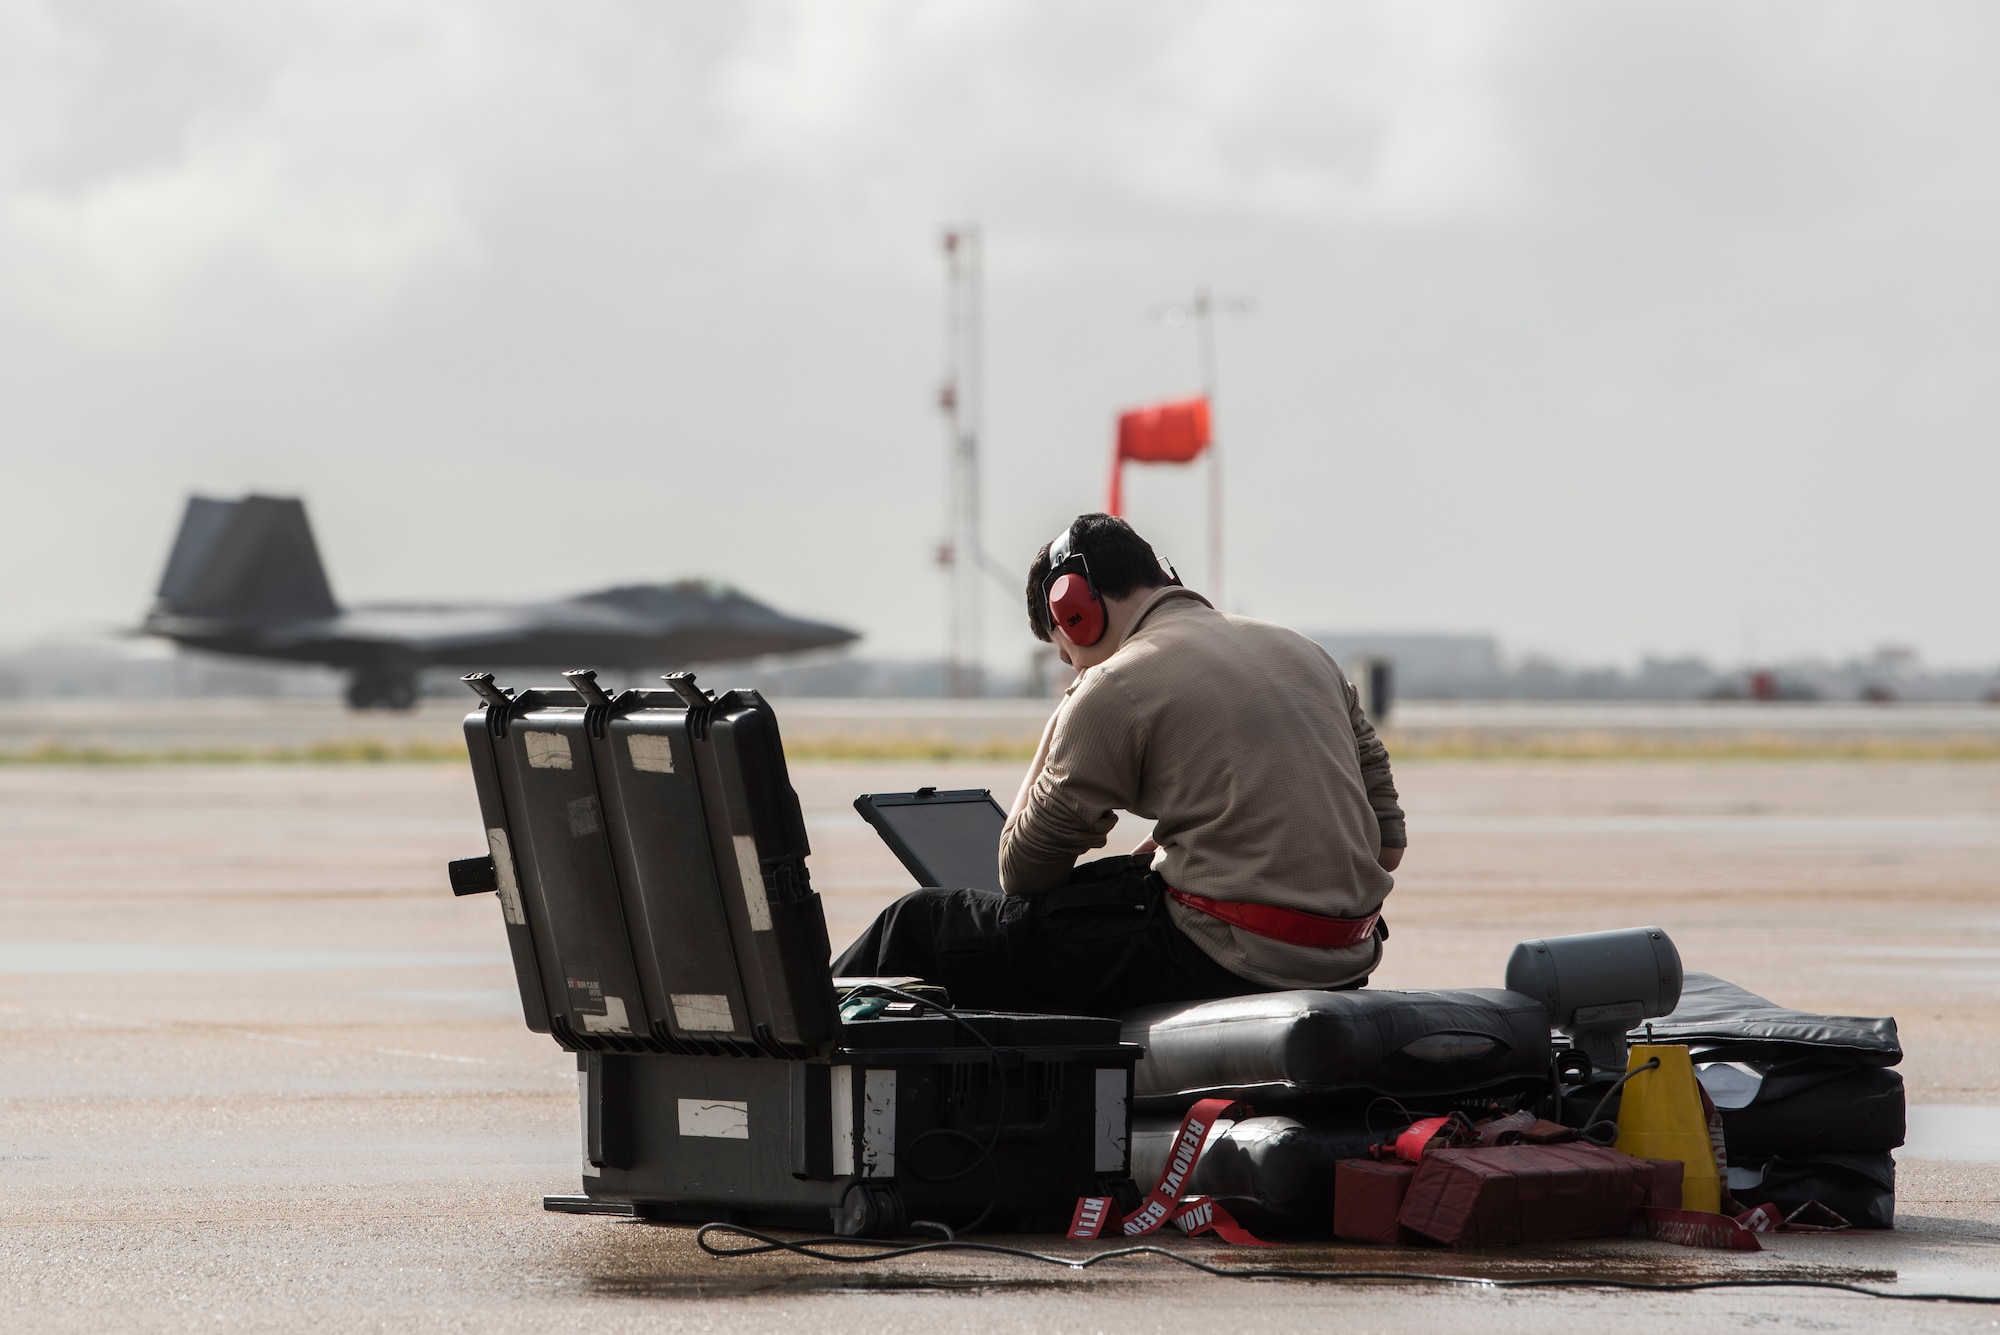 U.S. Air Force Airman 1st Class Angelo Trent, 90th Aircraft Maintenance Unit crewchief, views a portable maintenance aid during in-house exercise Patriot Grizzly at Marine Corps Air Station Miramar, San Diego, Calif., Jan. 18, 2019. Patriot Grizzly involved both active-duty and reserves from Joint Base Elmendorf-Richardson, Alaska, integrating to increase readiness through consistent flying operations.